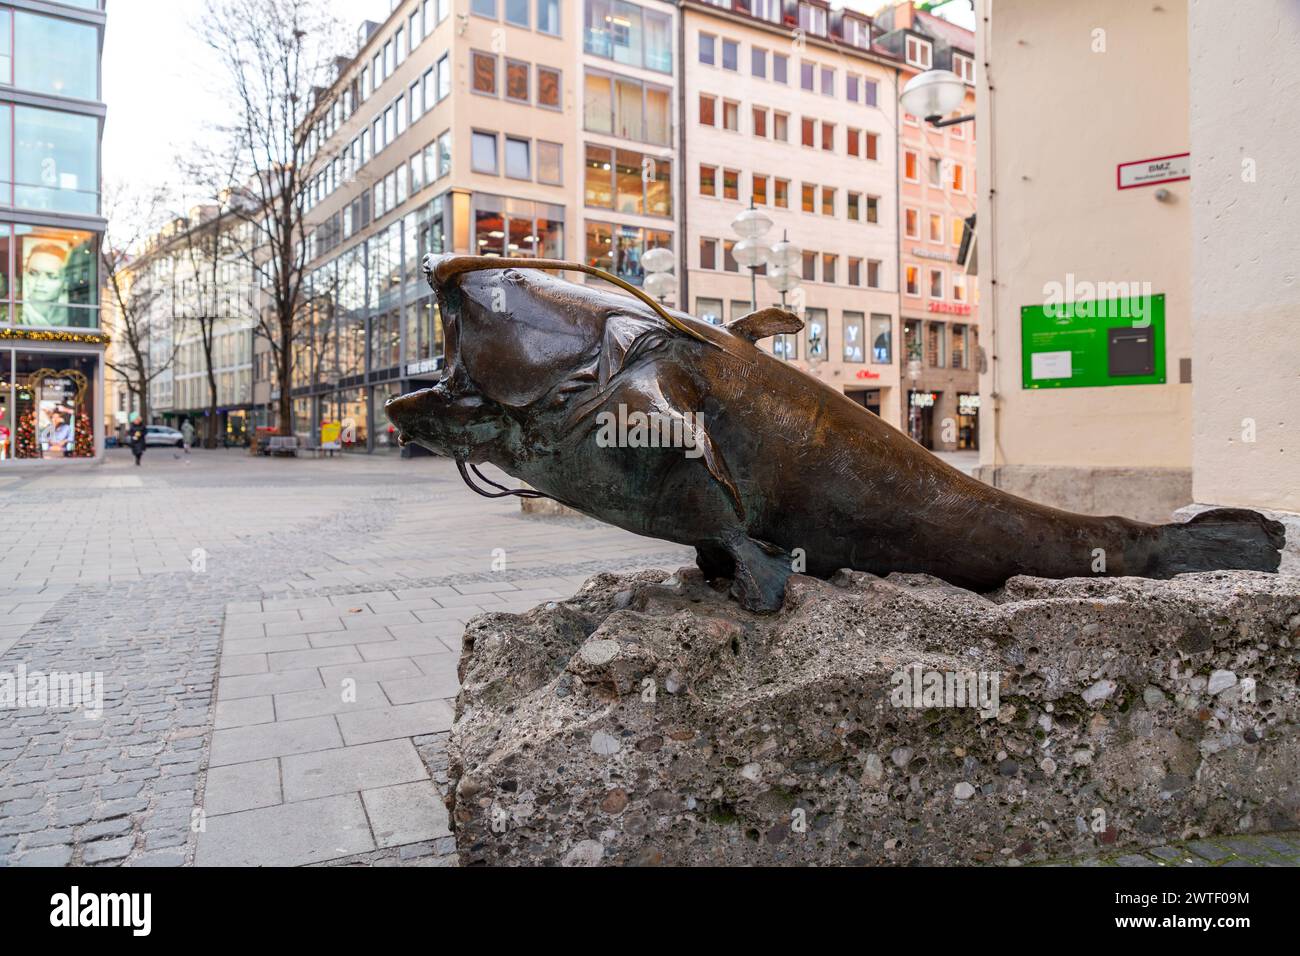 Munich, Germany - DEC 23, 2021: Wallers sculpture in front of the Fishery and Hunting Museum in Marienplatz, Munich, Germany. Replica of the Porcellin Stock Photo